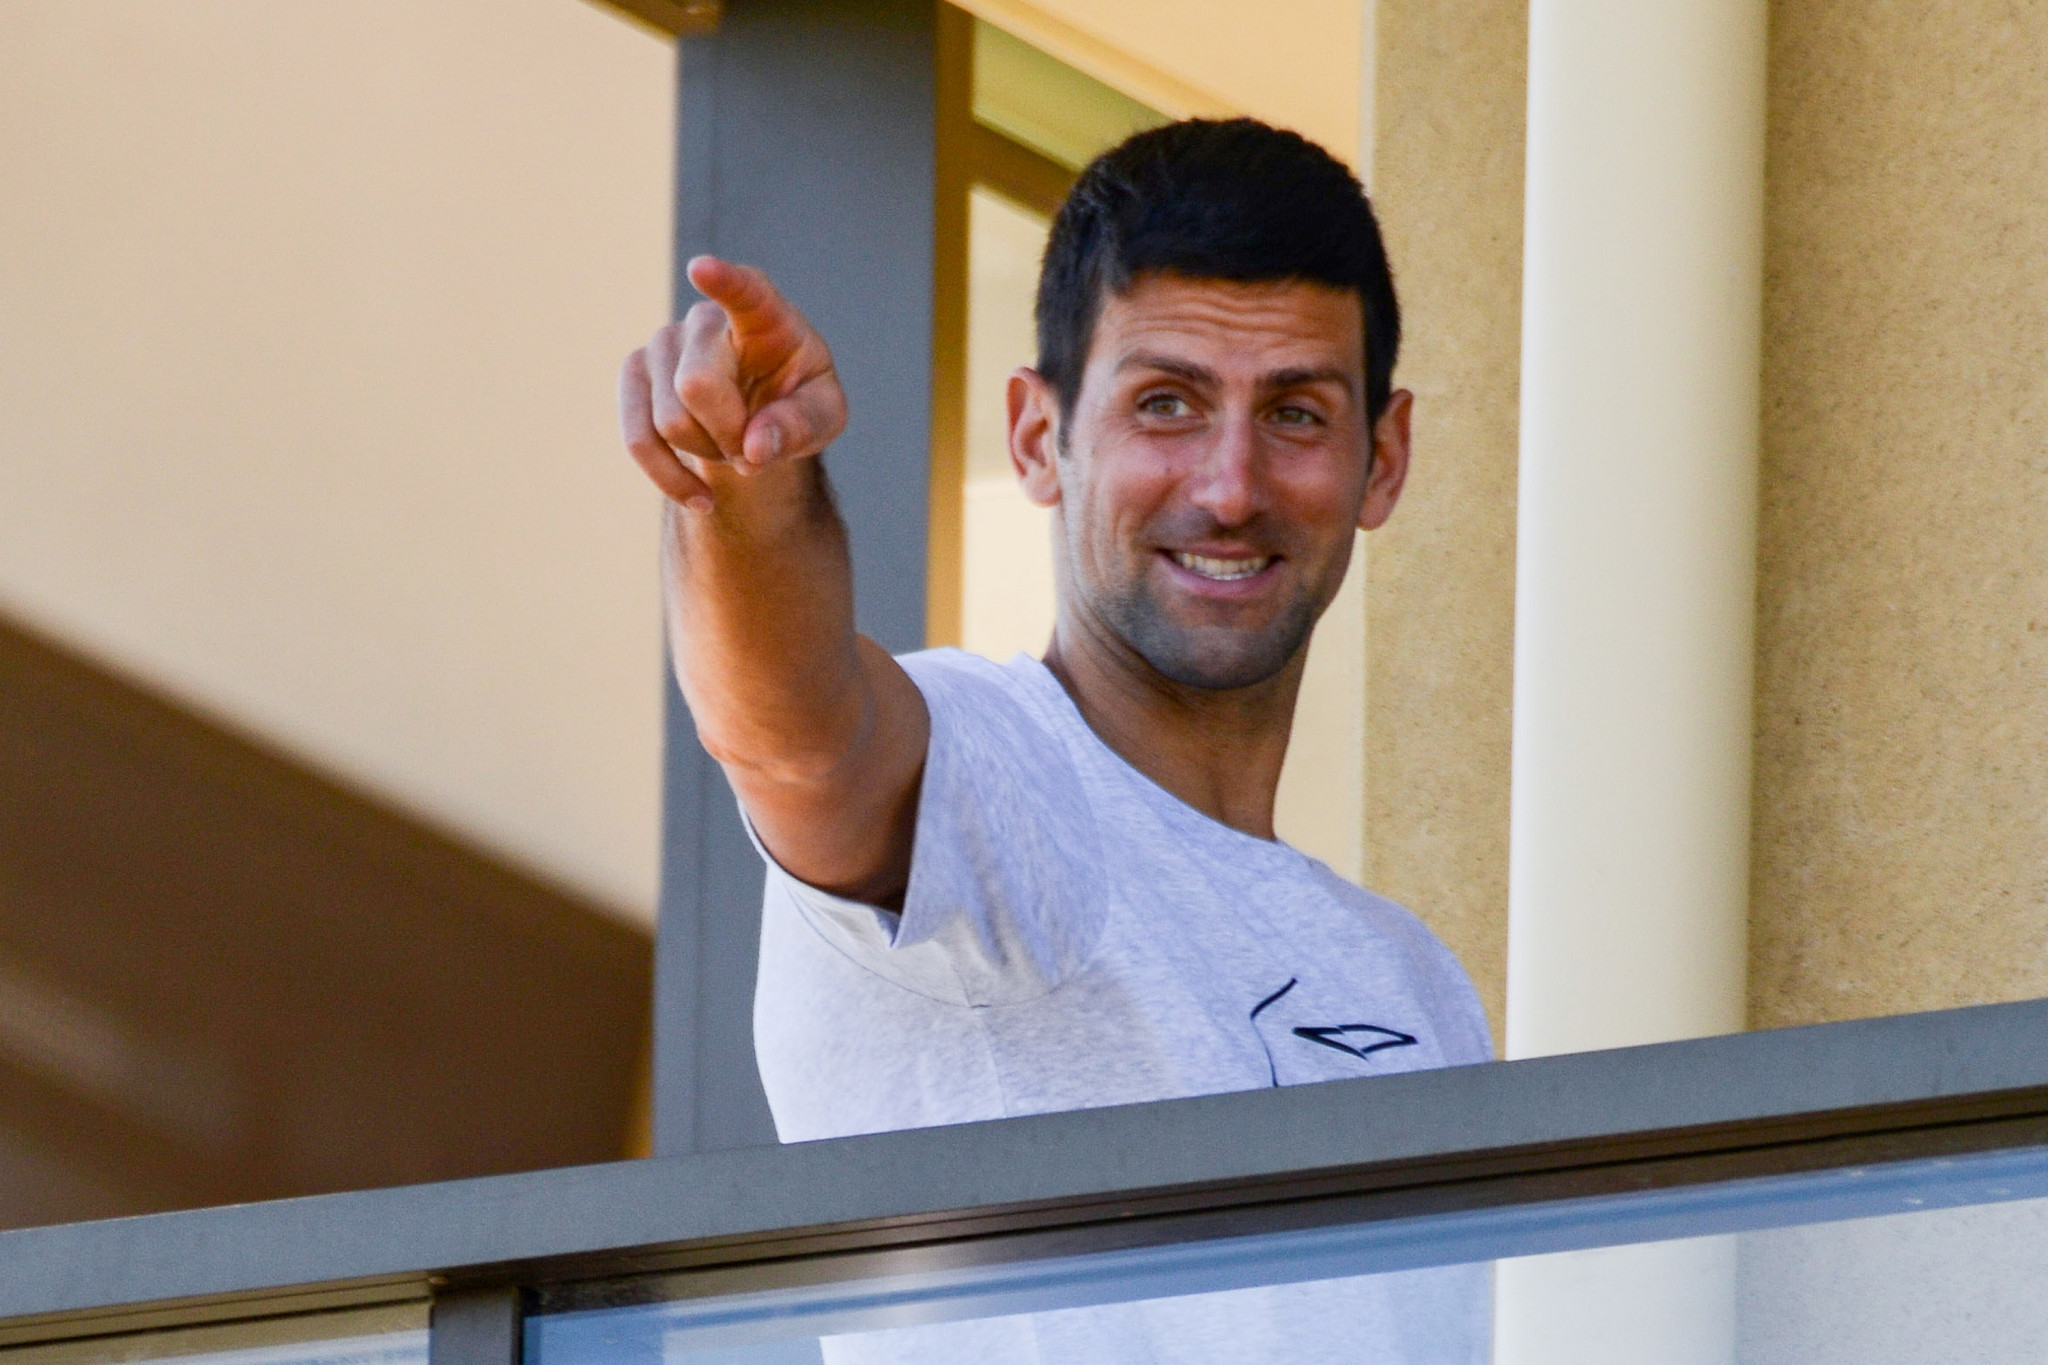 World number one Novak Djokovic says most players do not want to continue playing in 2021 if it will involve quarantine measures such as those imposed ahead of the current Australian Open ©Getty Images